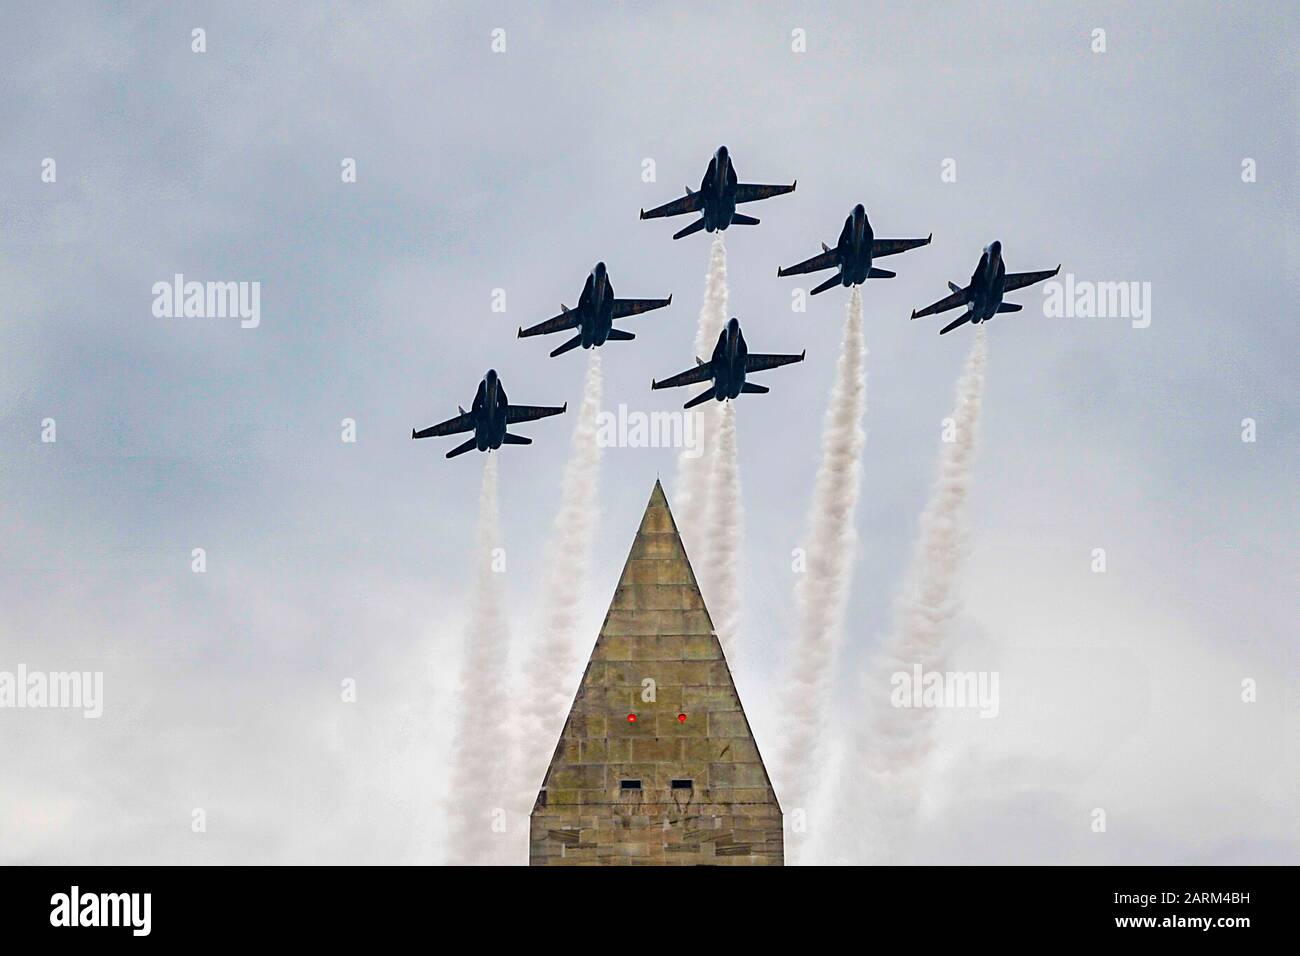 190704-N-IR734-1024 WASHINGTON (July 4, 2019) The U.S. Navy flight demonstration squadron, the Blue Angels, fly over the Washington Monument during a Fourth of July celebration in Washington, D.C., July 4, 2019. The team is scheduled to conduct 61 flight demonstrations at 32 locations across the United States and Canada in 2019. (U.S. Navy photo by Mass Communication Specialist 1st Class Ian Cotter/Released) Stock Photo